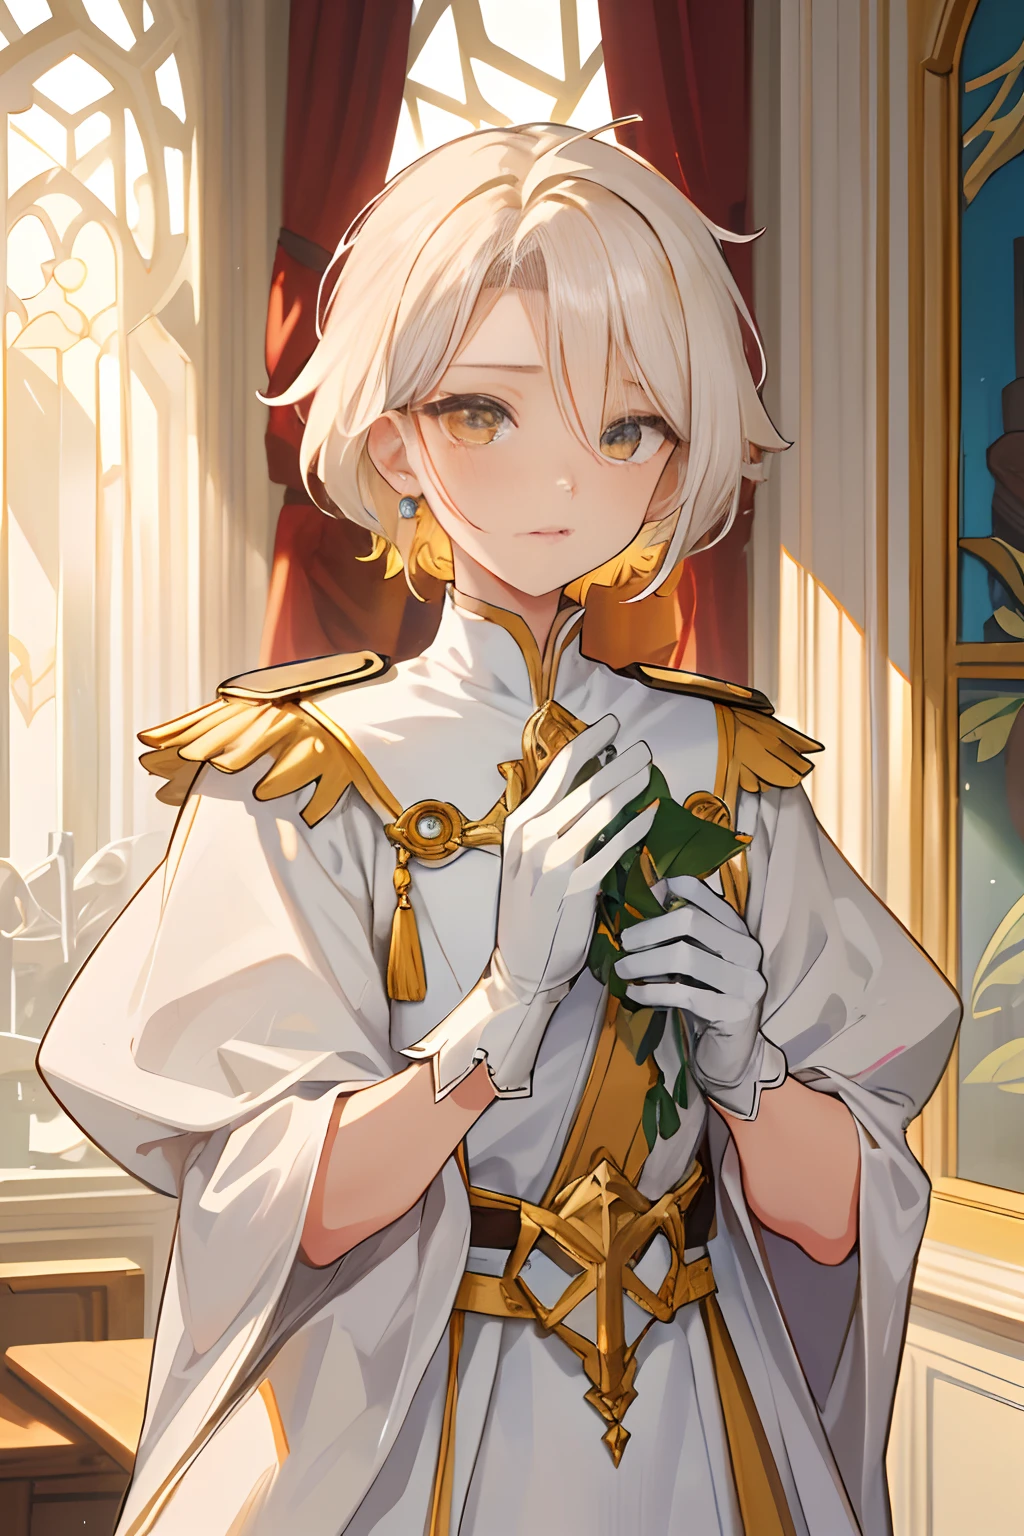 prinz，children's，1boys，Yellow decoration，citrine，Pedras preciosas，starlights，Depicts delicate eyes，Opal eyes，Depict delicate facial features，White uniform，Maximalism，Sophisticated design，White gloves，goth style，Priesthood dress，ribbon，with short white hair，Messy hair, Soft and fluffy hair, hair between eye，extreme hight detail，Delicate depiction，Orange eyes，Except for yellow，All colors are low saturation，Only yellow is the most conspicuous，royal house，ellegance，glorious，royal robe